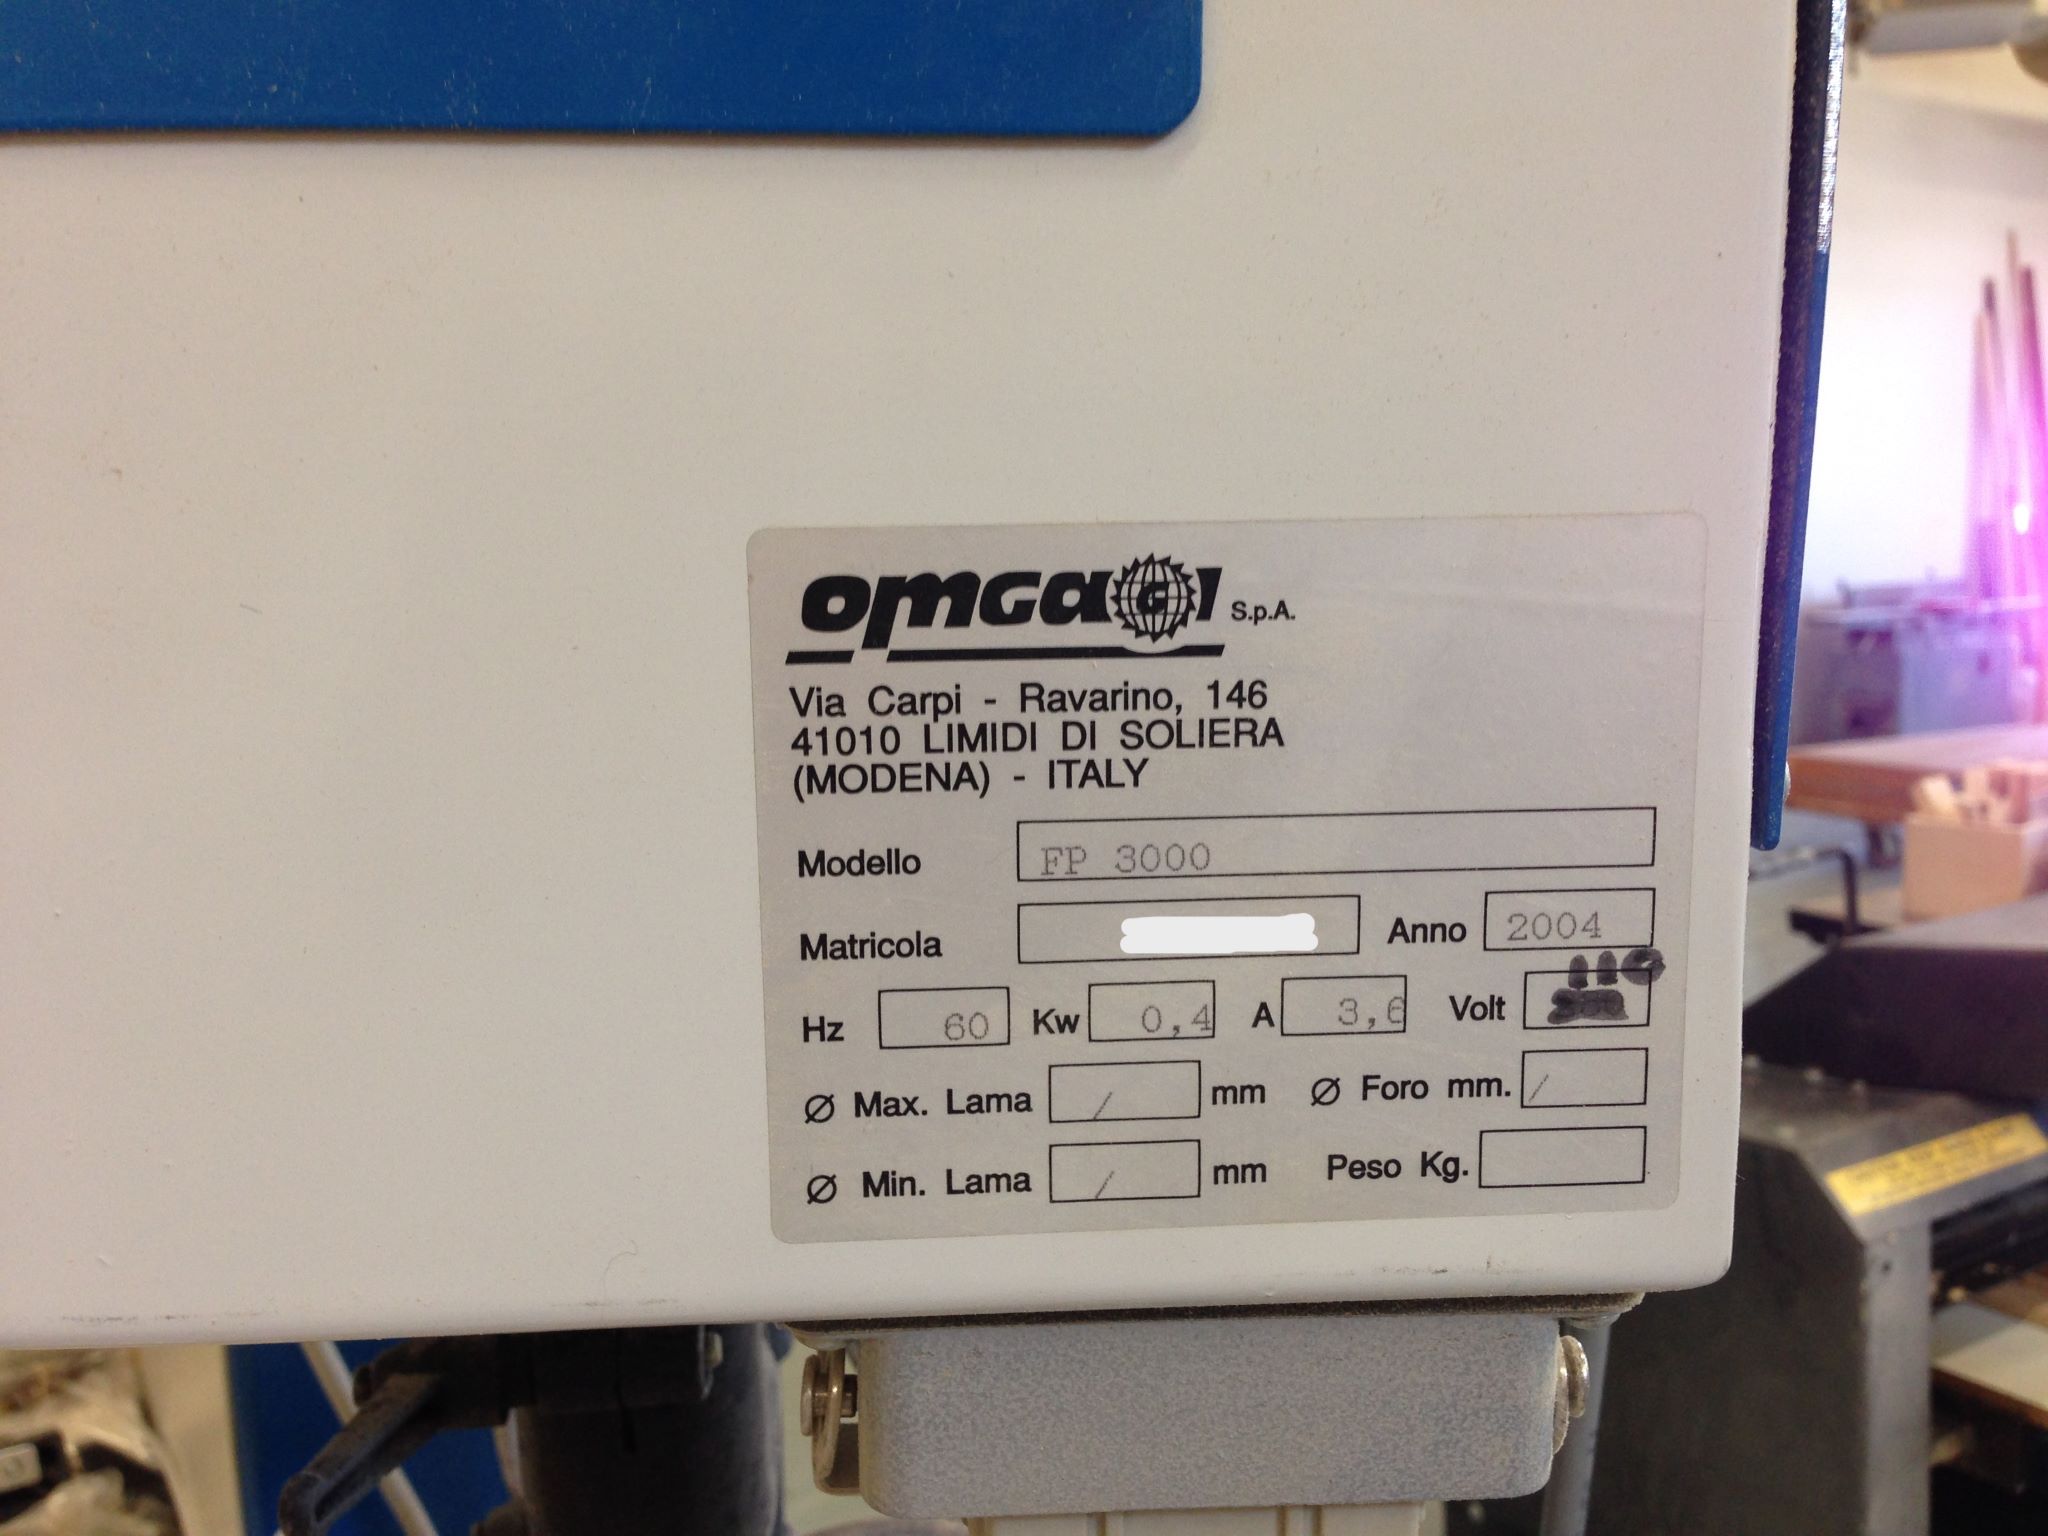 Omga V913P V Cutting / Double Miter Saw w/ Omga FP3000 Automated Stop (Used) Item # UE-041224C